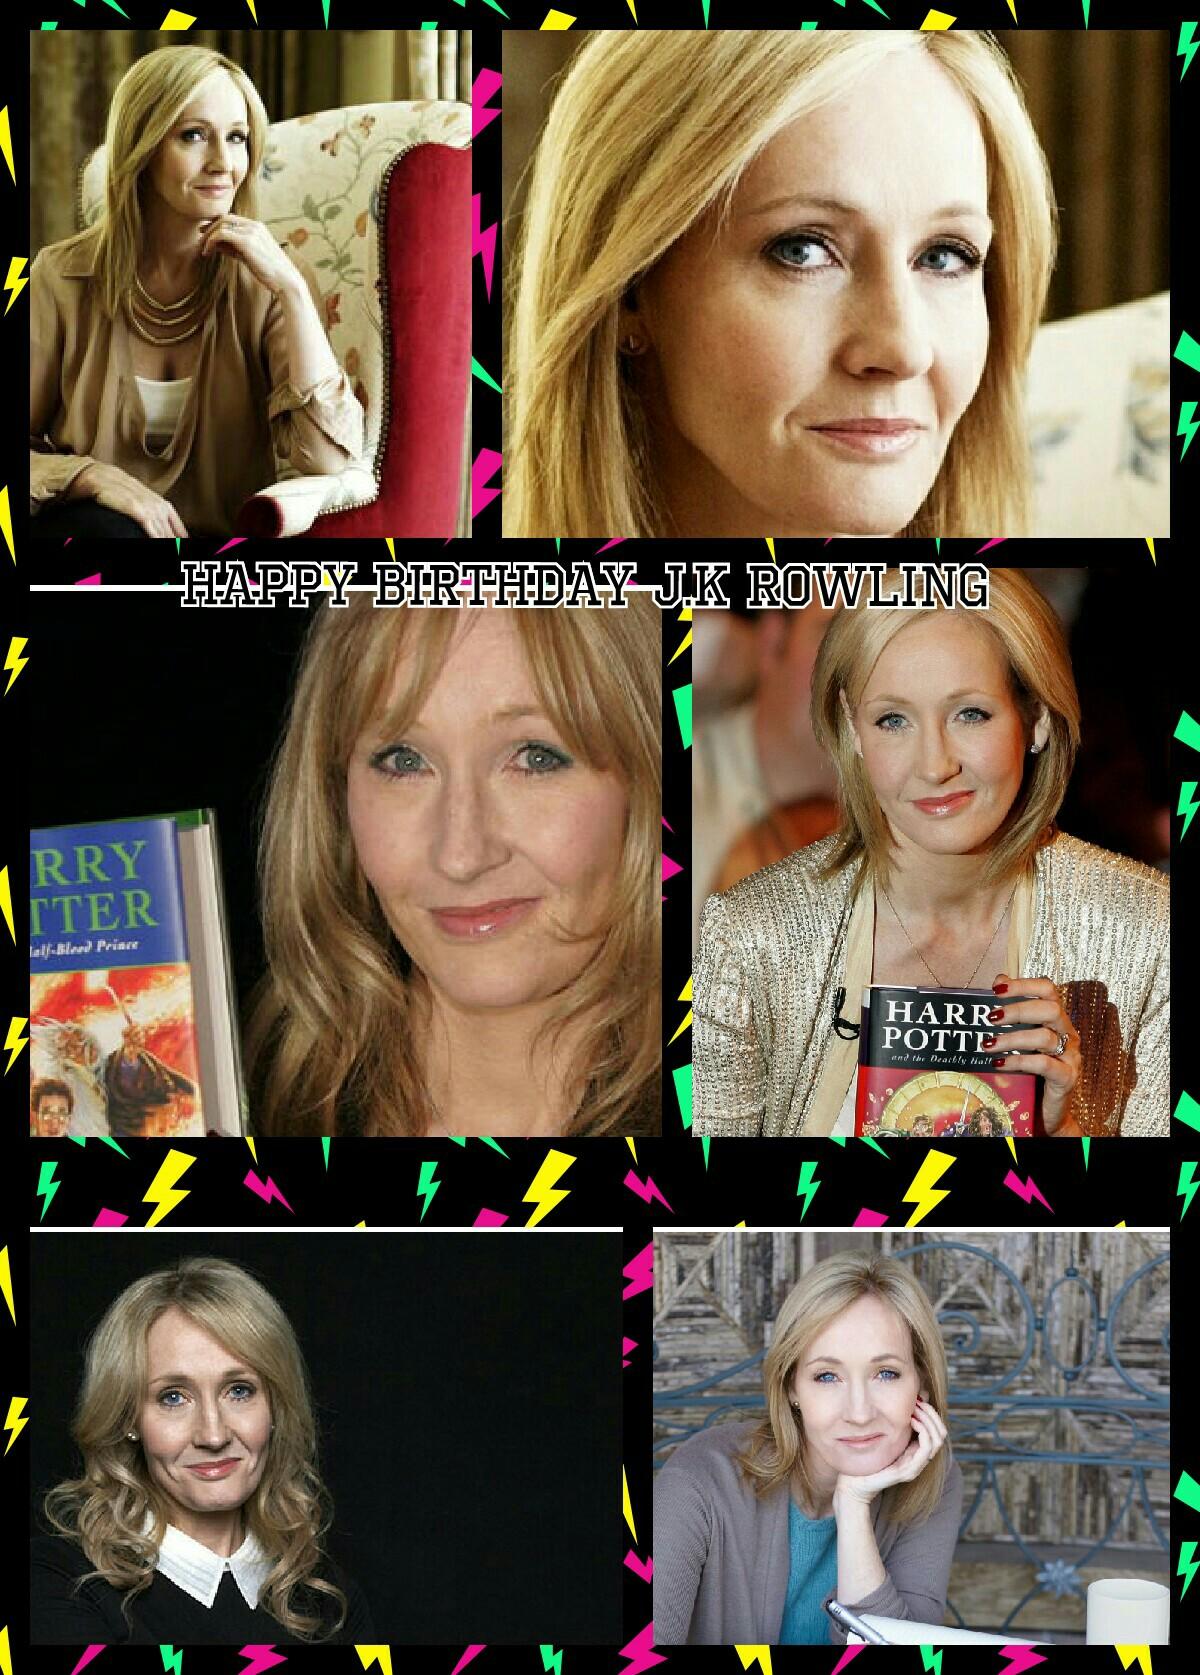 Happy birthday J.K Rowling my favourite author who brought the amazing book series to life Harry Potter 